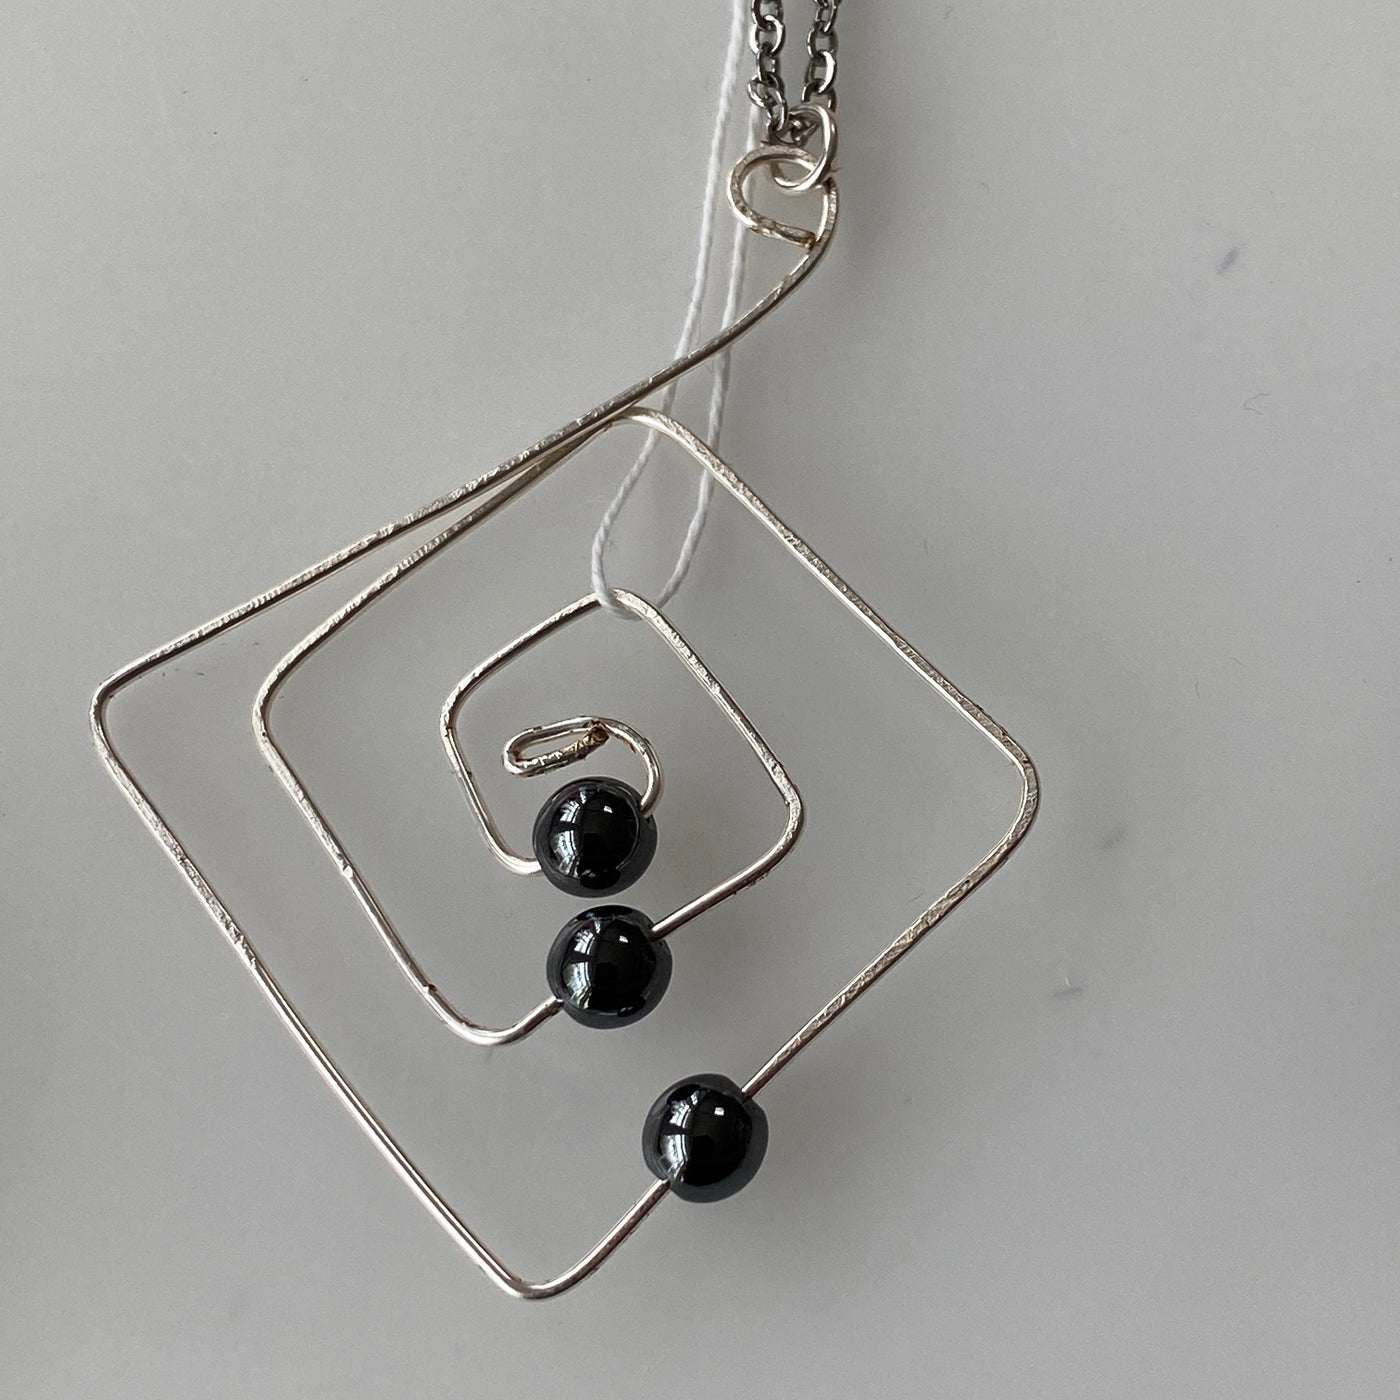 Hematite and silver wire lines collection pendant.